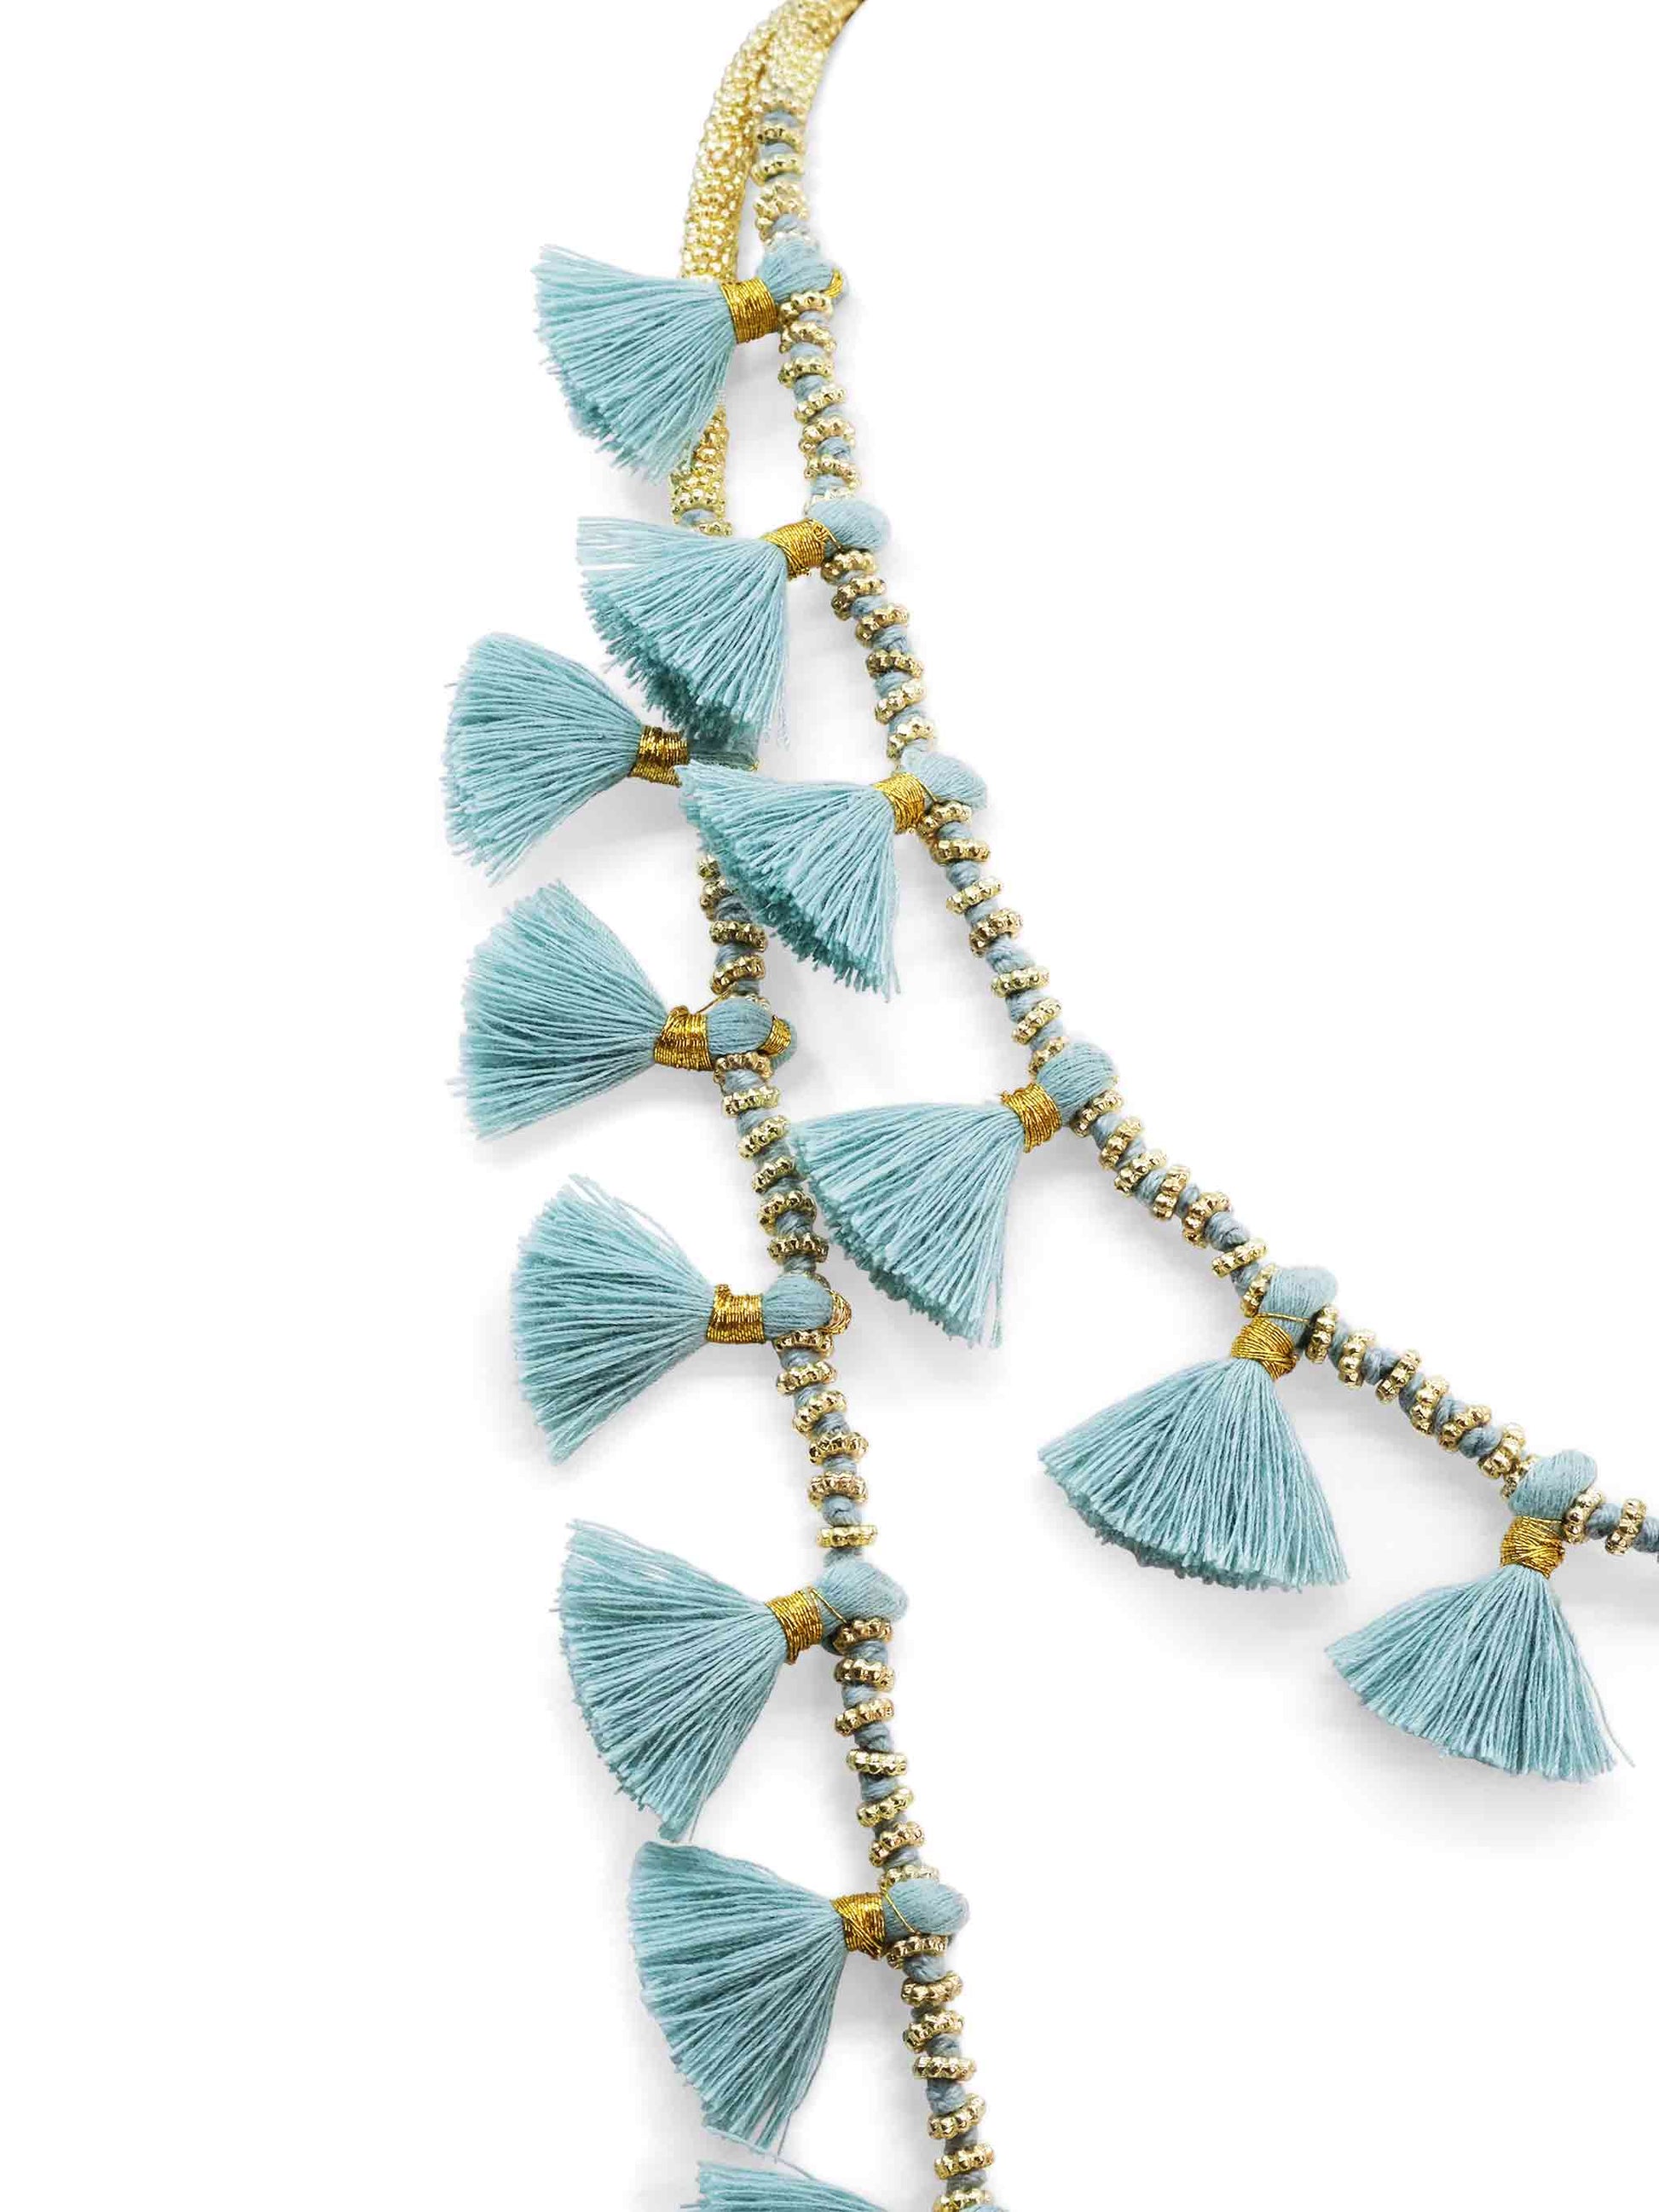 Bohemian Gold Tone Long Necklace with Teal Blue Tassels